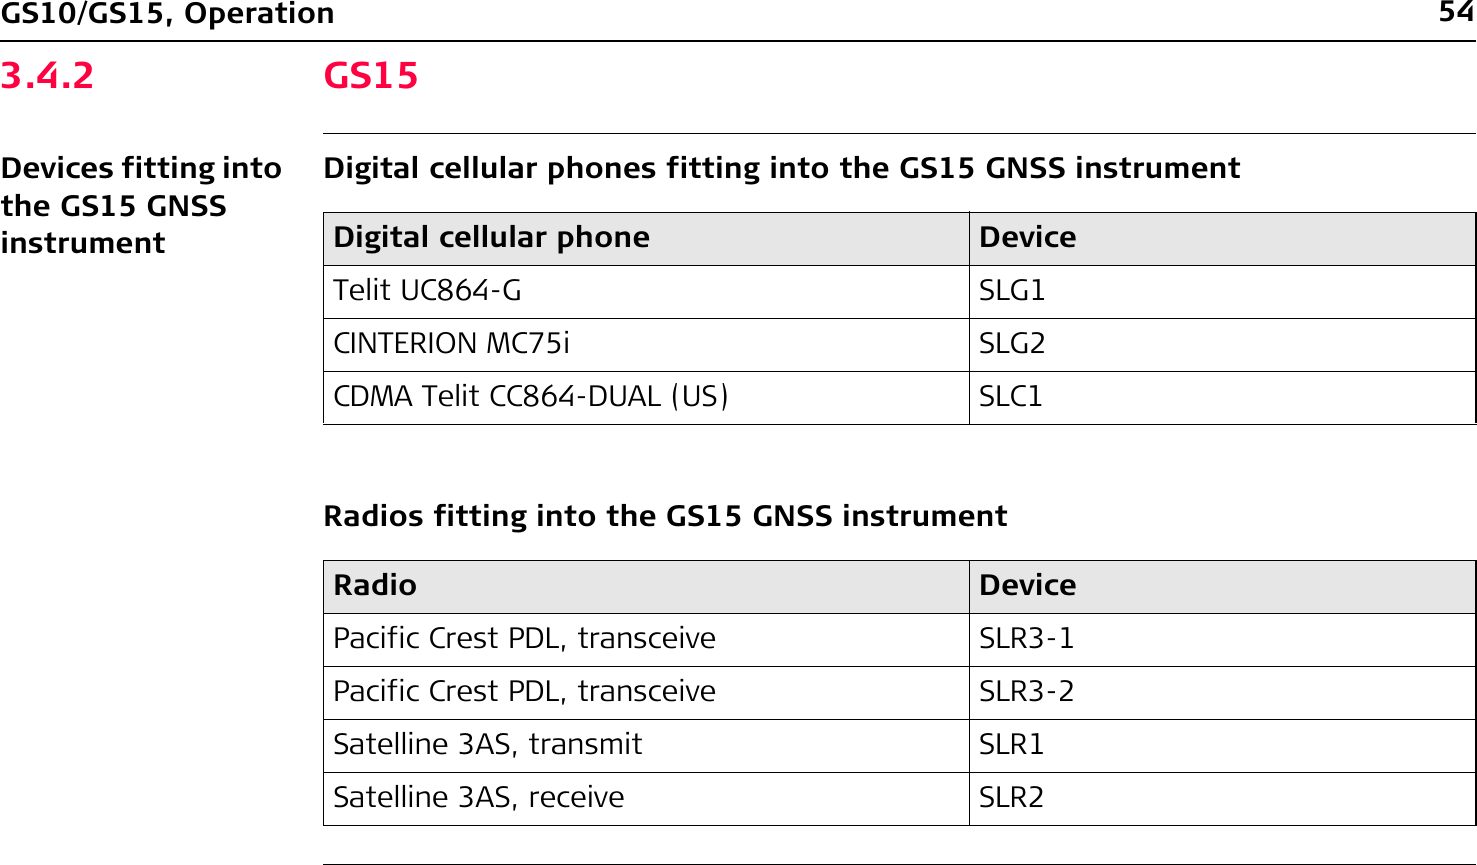 54GS10/GS15, Operation3.4.2 GS15Devices fitting into the GS15 GNSS instrumentDigital cellular phones fitting into the GS15 GNSS instrumentRadios fitting into the GS15 GNSS instrumentDigital cellular phone DeviceTelit UC864-G SLG1CINTERION MC75i SLG2CDMA Telit CC864-DUAL (US) SLC1Radio DevicePacific Crest PDL, transceive SLR3-1Pacific Crest PDL, transceive SLR3-2Satelline 3AS, transmit SLR1Satelline 3AS, receive SLR2